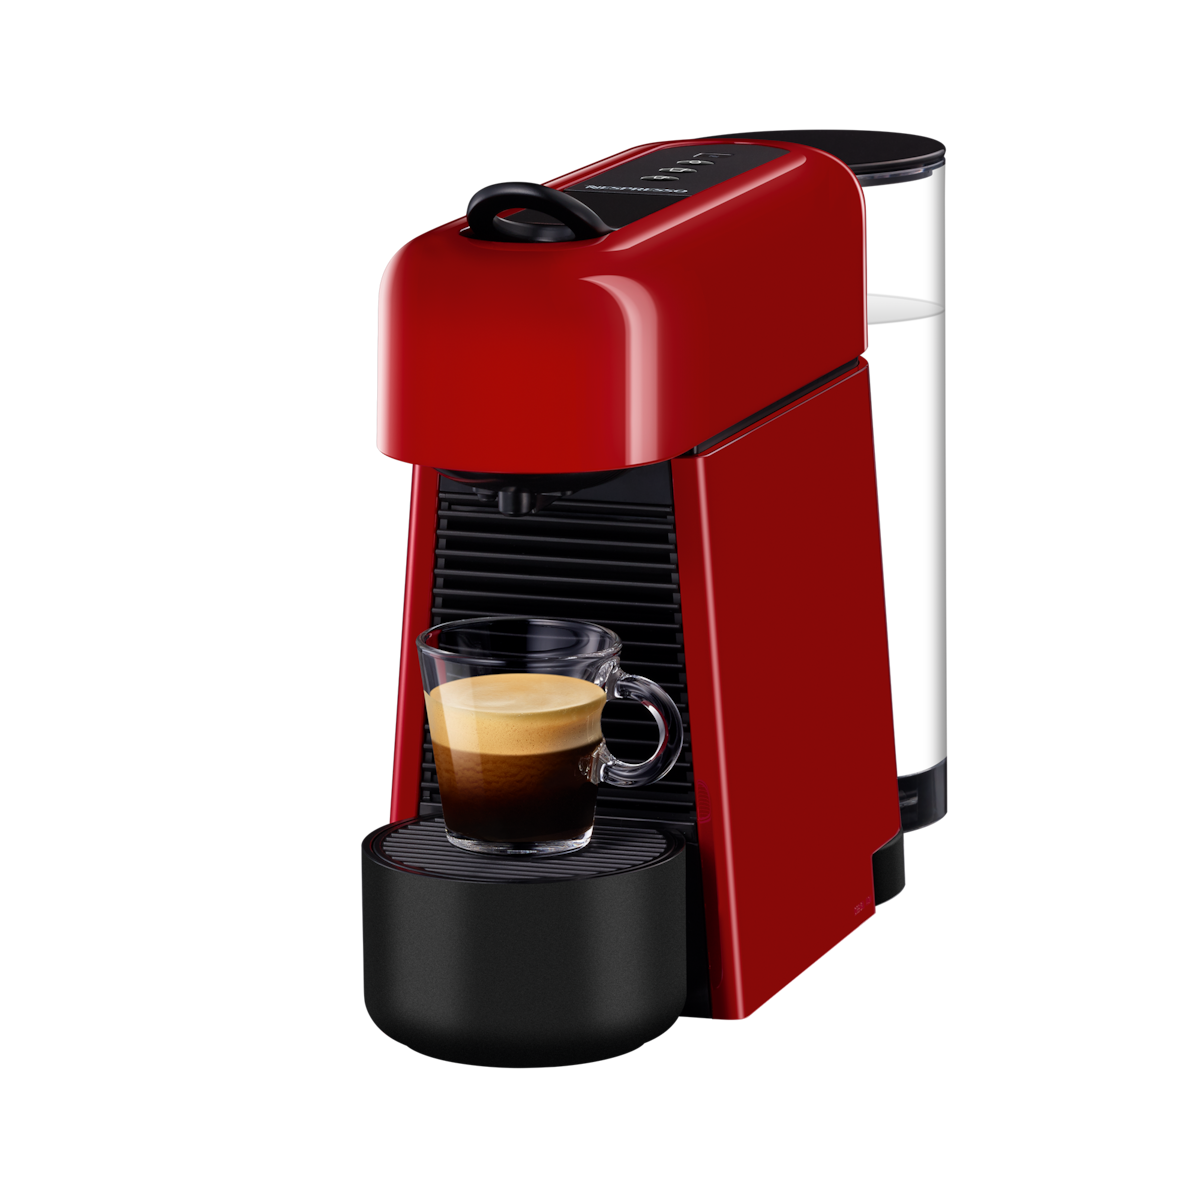 User manual and frequently asked questions Nespresso essenza Automatic  XN212040